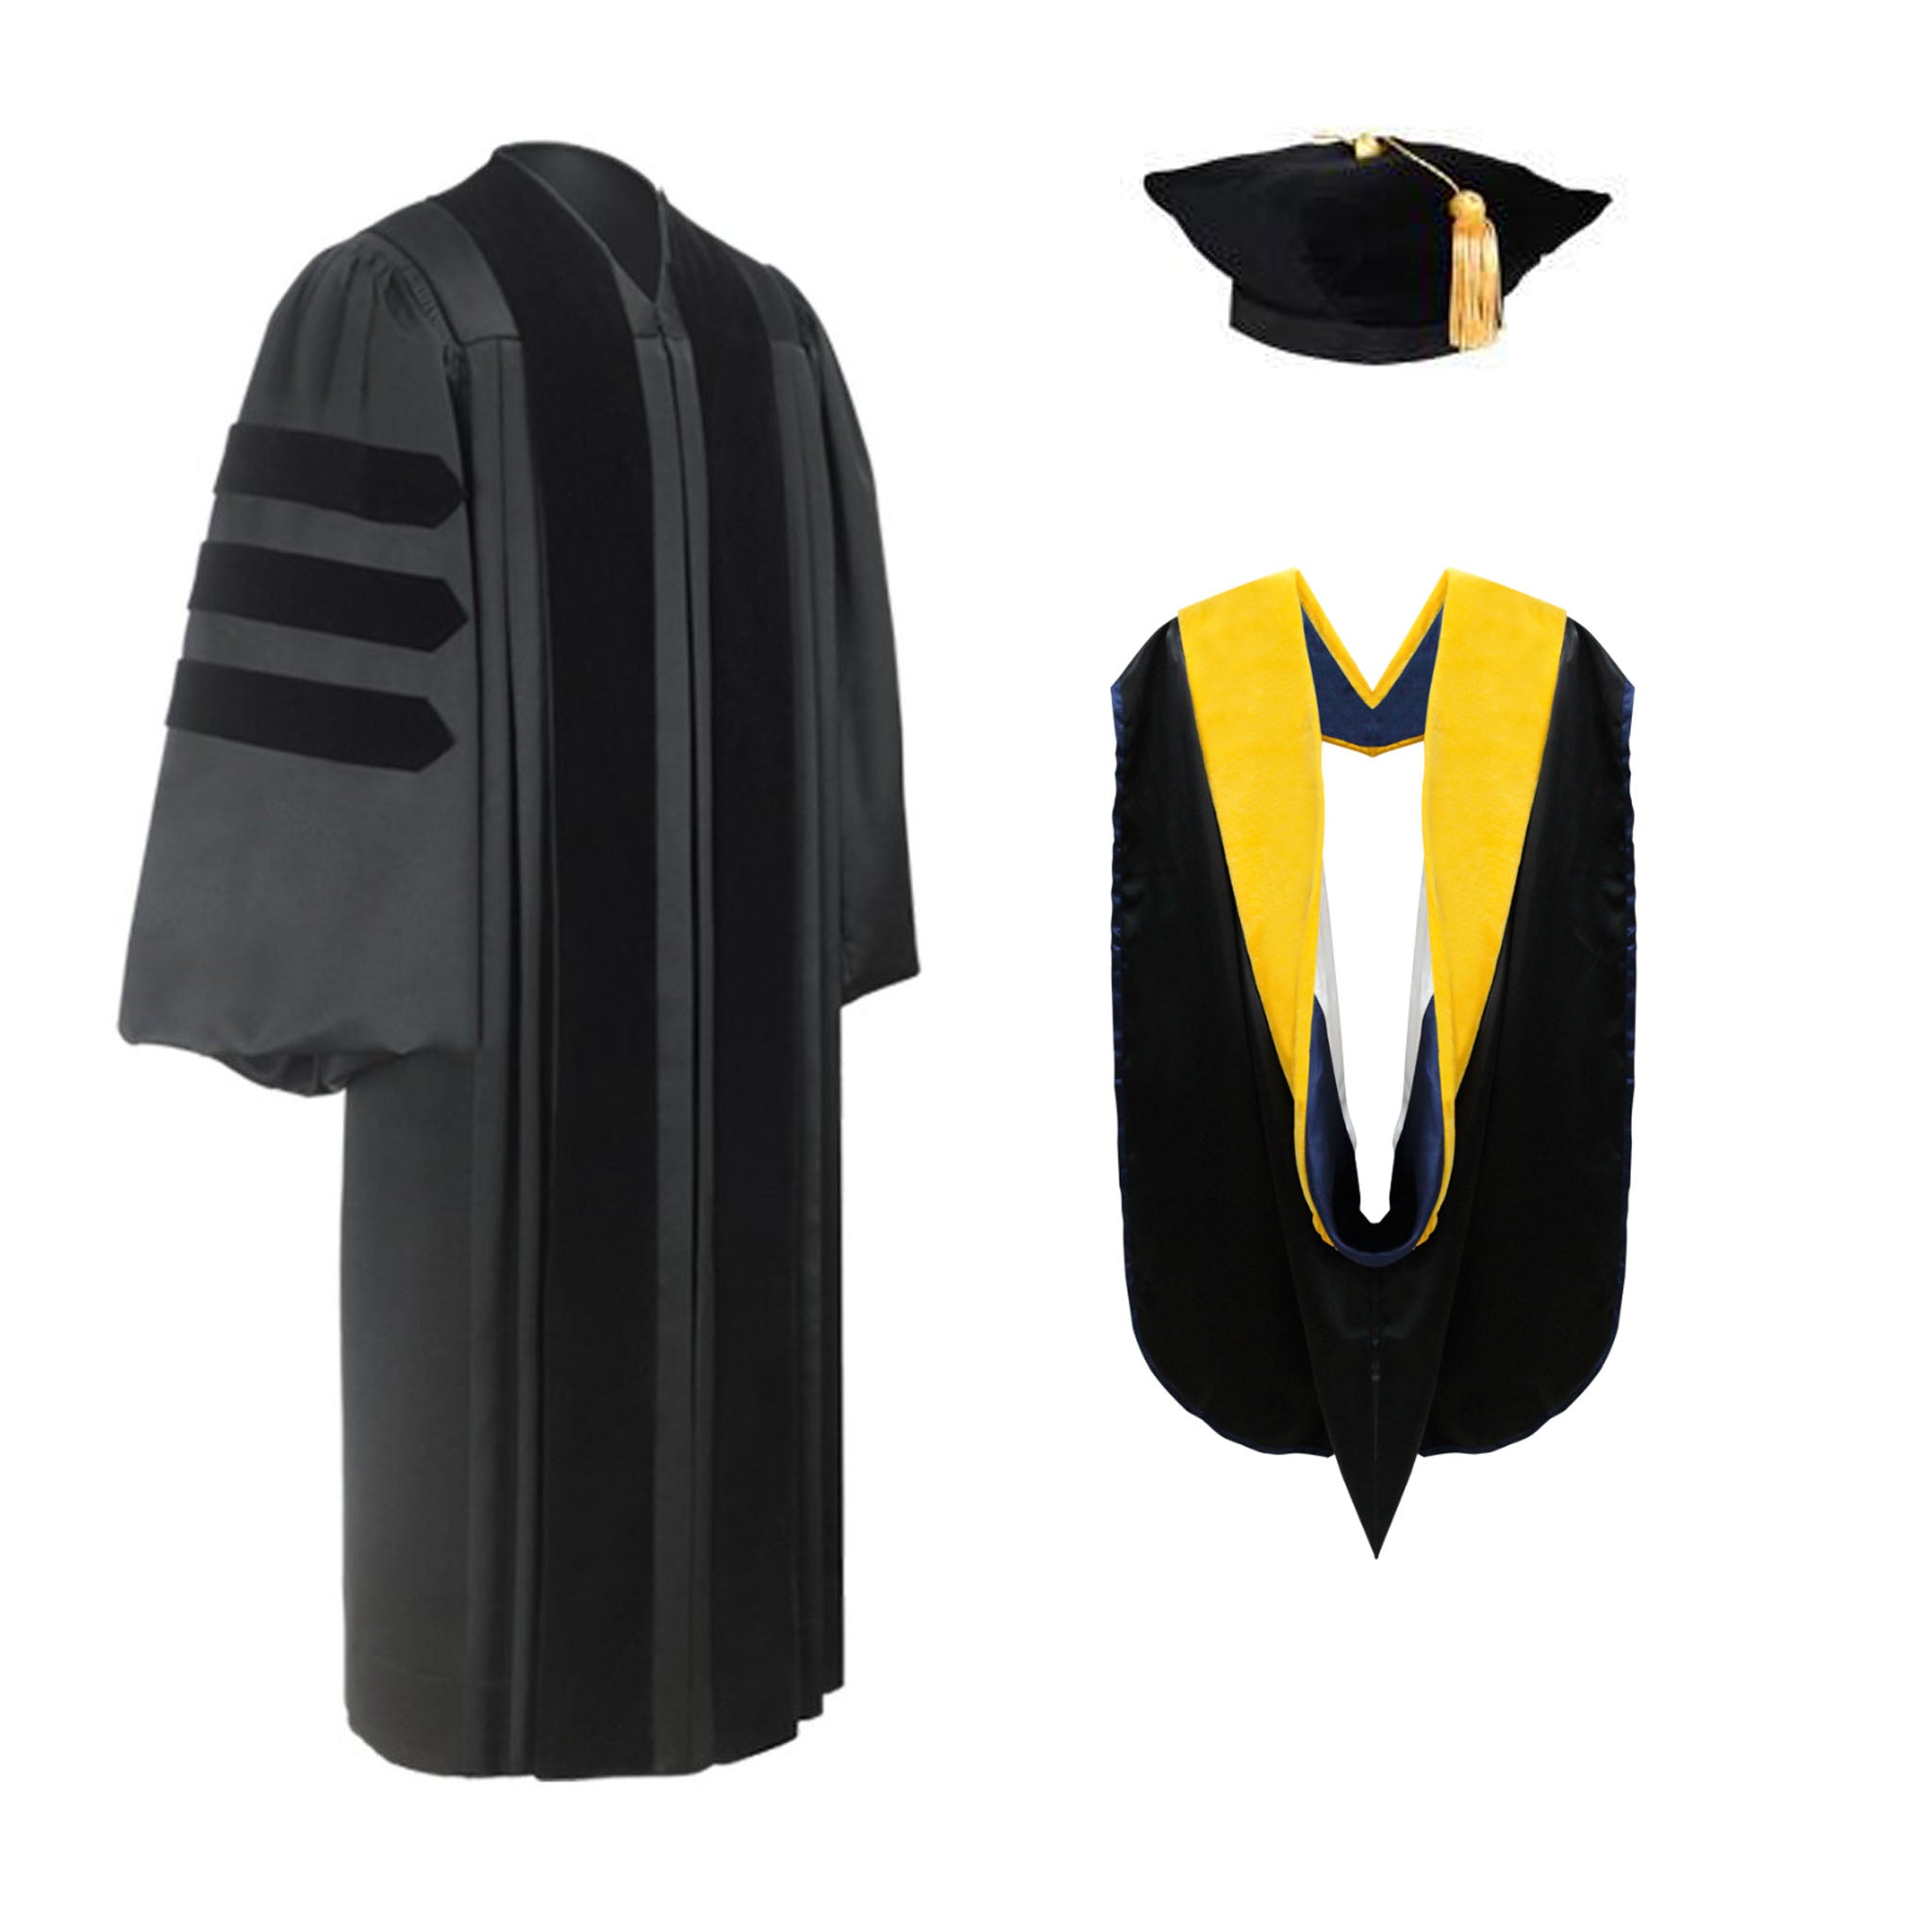 V-Hoods [Elementary School Gowns & Access] - $7.25 : Graduation Supplies |  Caps and Gowns, Tassels, Stoles | Graduate Affairs